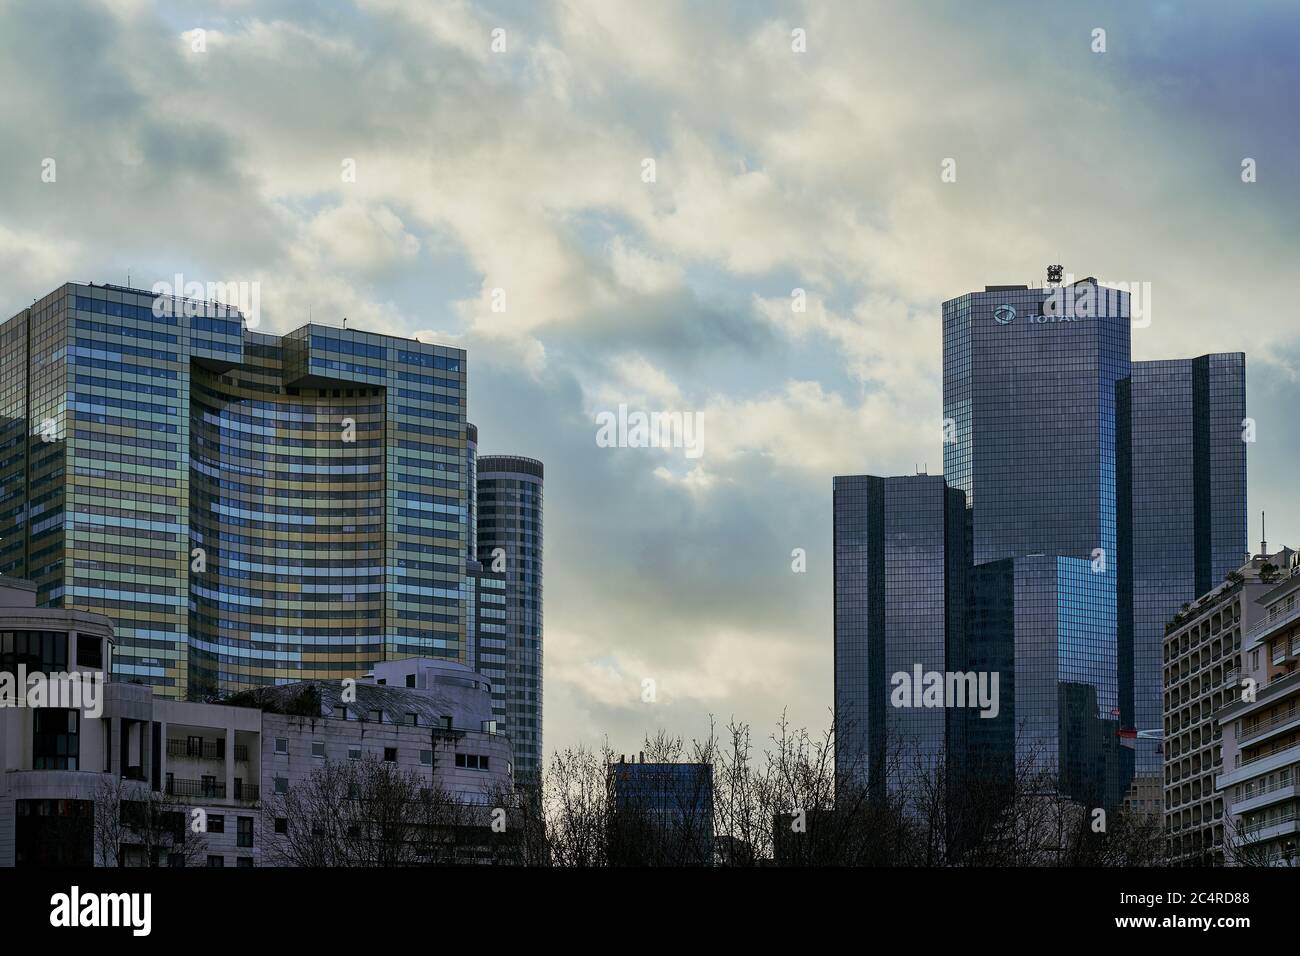 KPMG and Total headquarters, skyscrapers and office buildings in La Defense business district, Paris Stock Photo